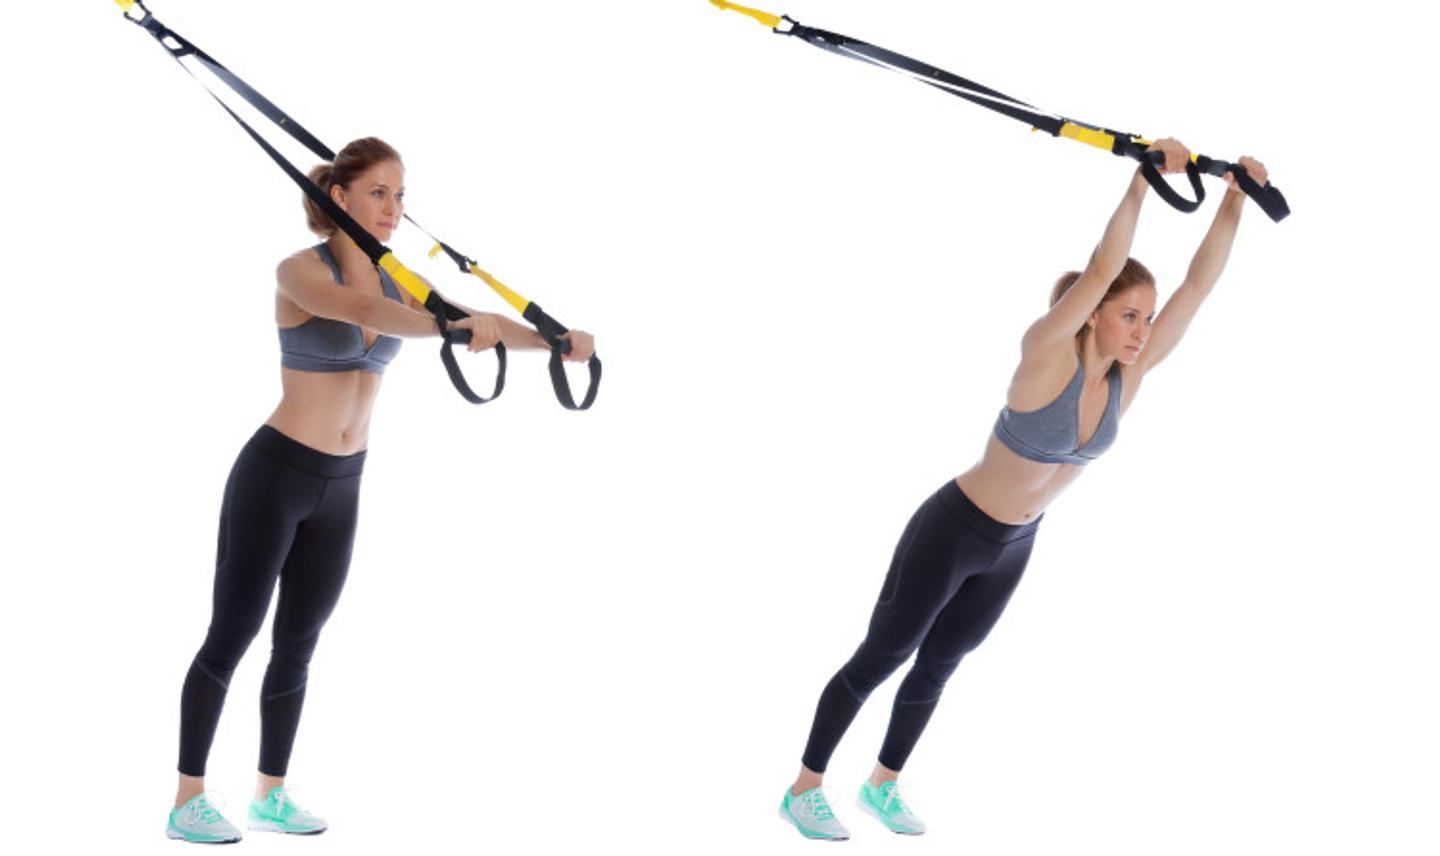 ISSA, International Sports Sciences Association, Certified Personal Trainer, ISSAonline, ISSA x TRX: Best TRX Exercises to Enhance Your Training Rollouts